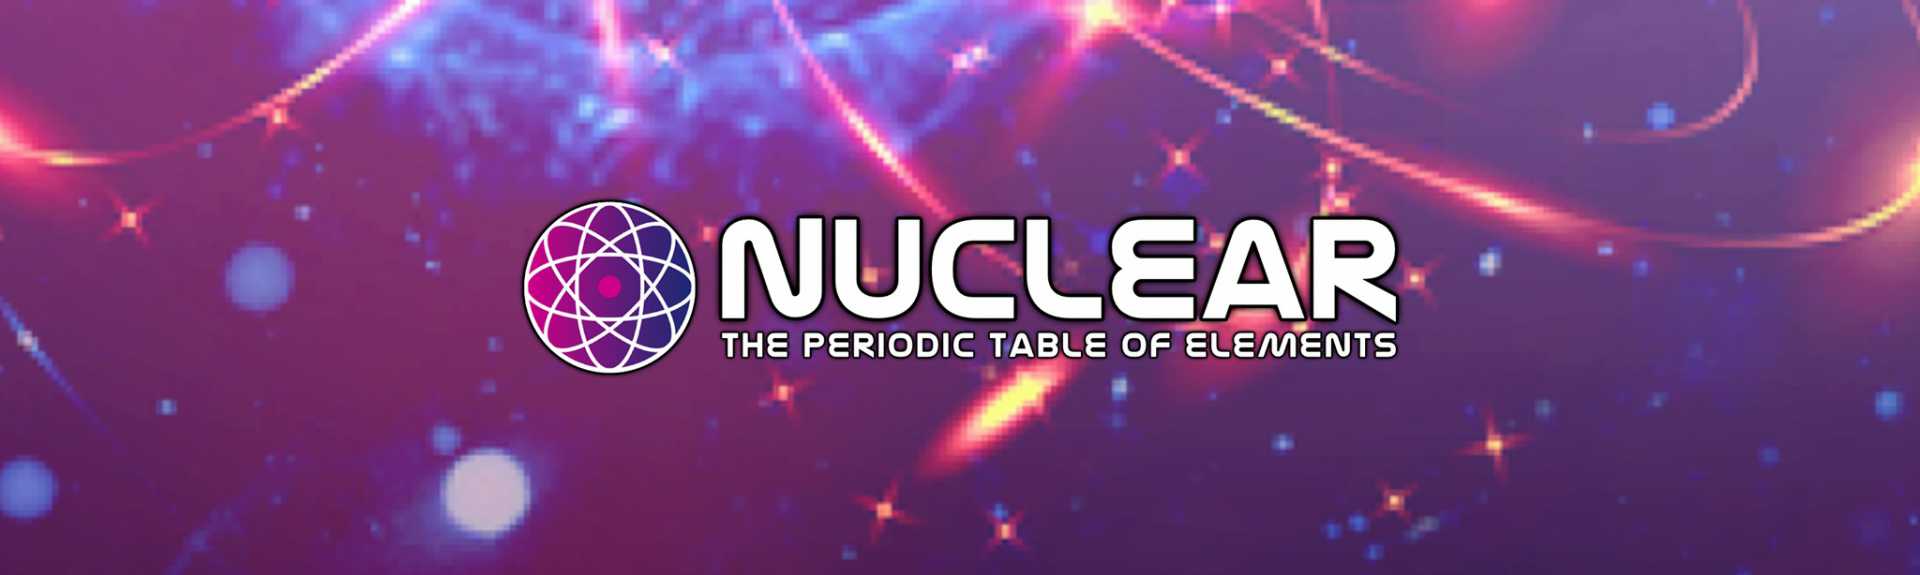 Nuclear: The Periodic Table Of Elements